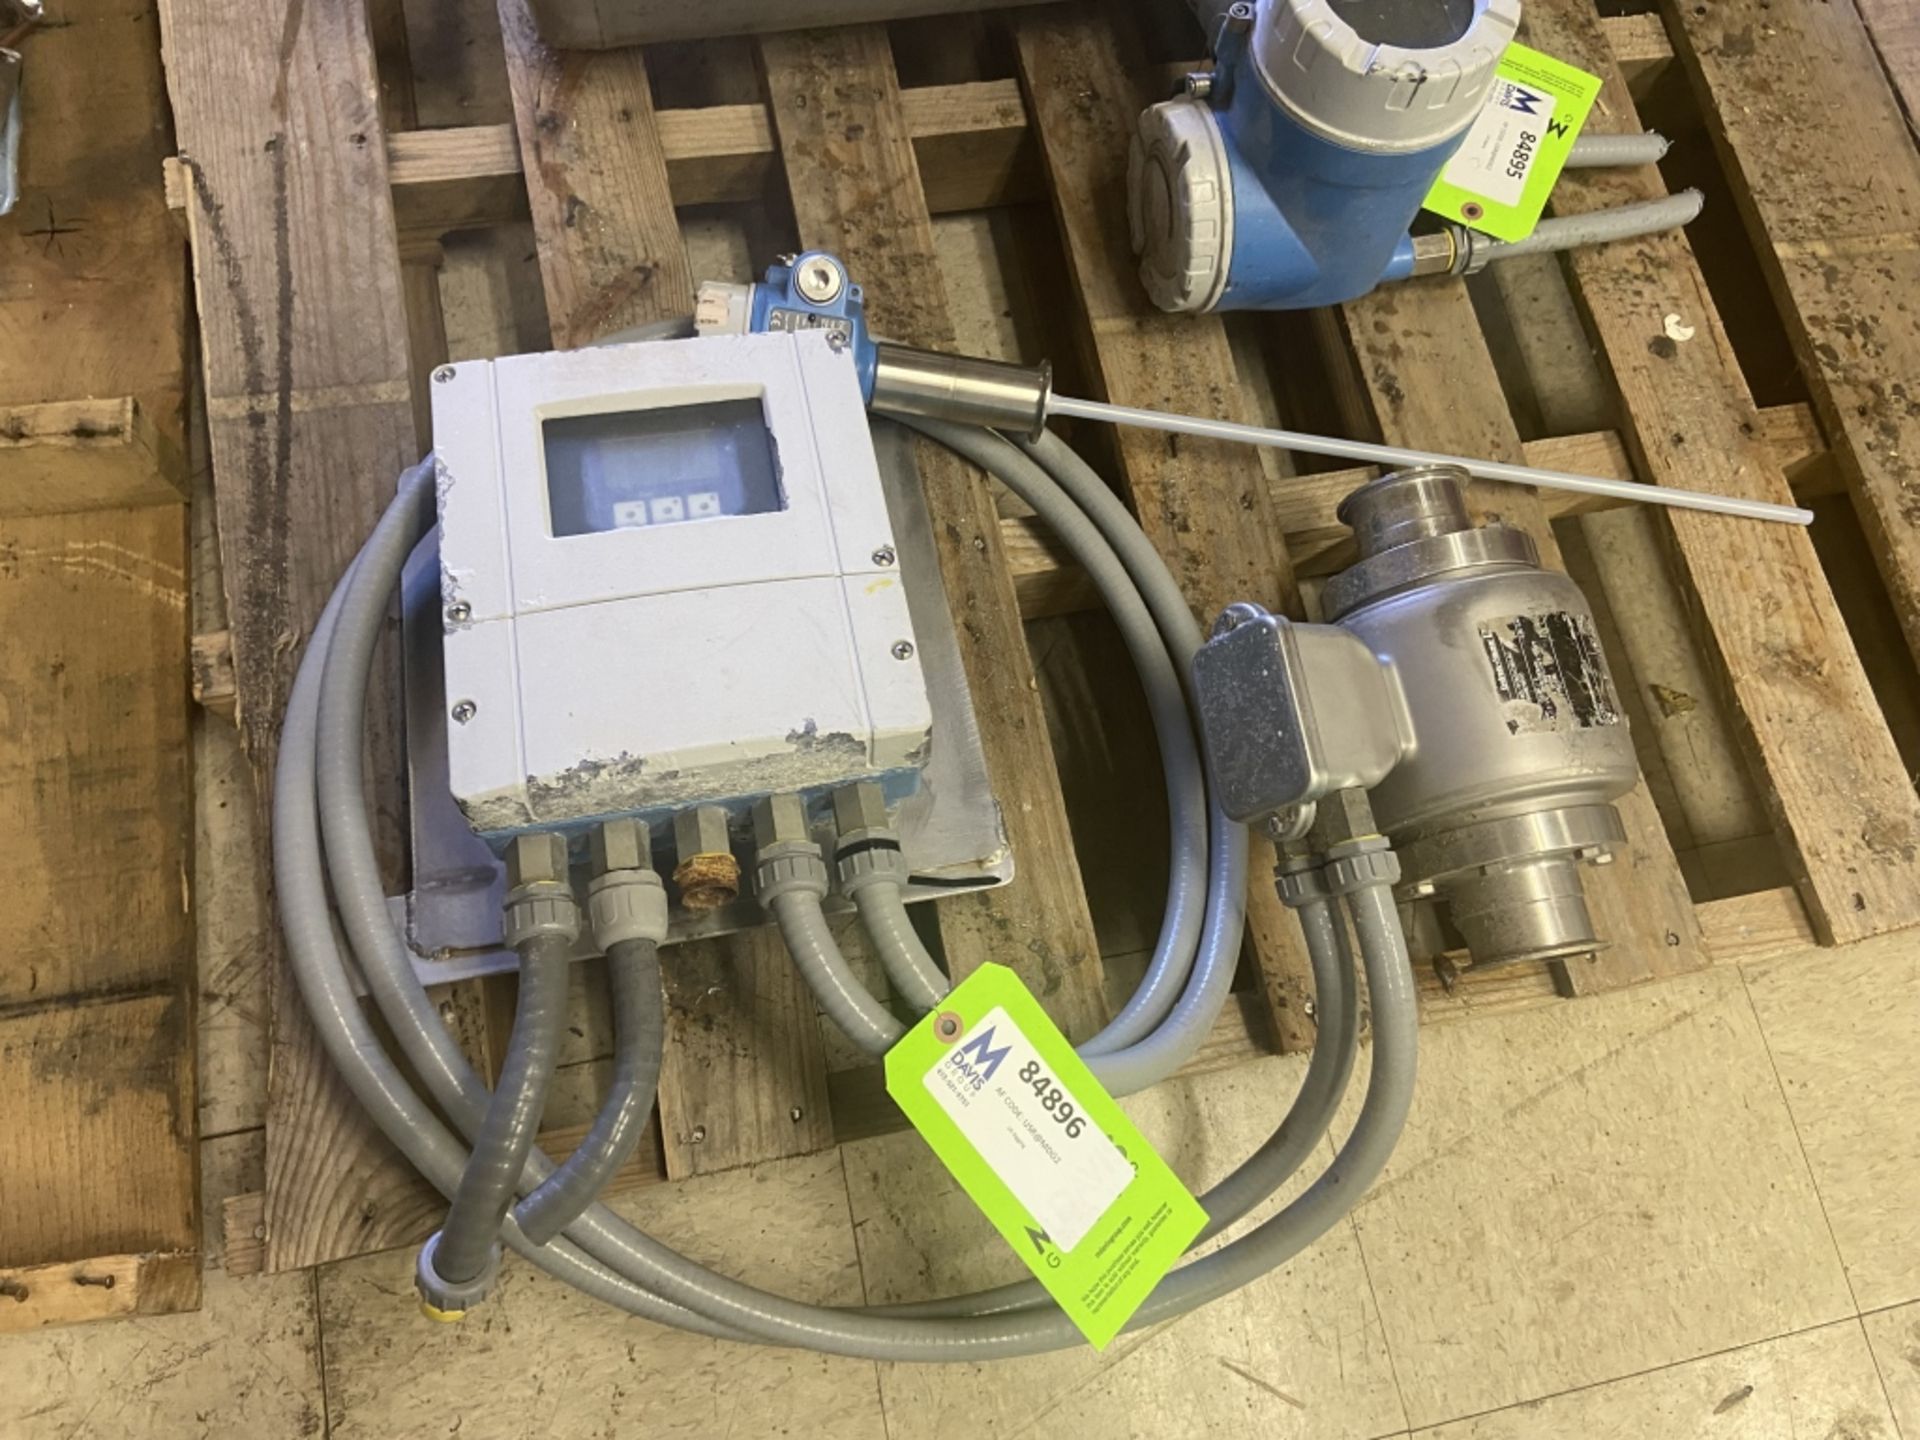 Endress + Hauser Flow Meter with Endress + Hauser Tank Leveler, with Aprox. 2-1/2" Clamp Type